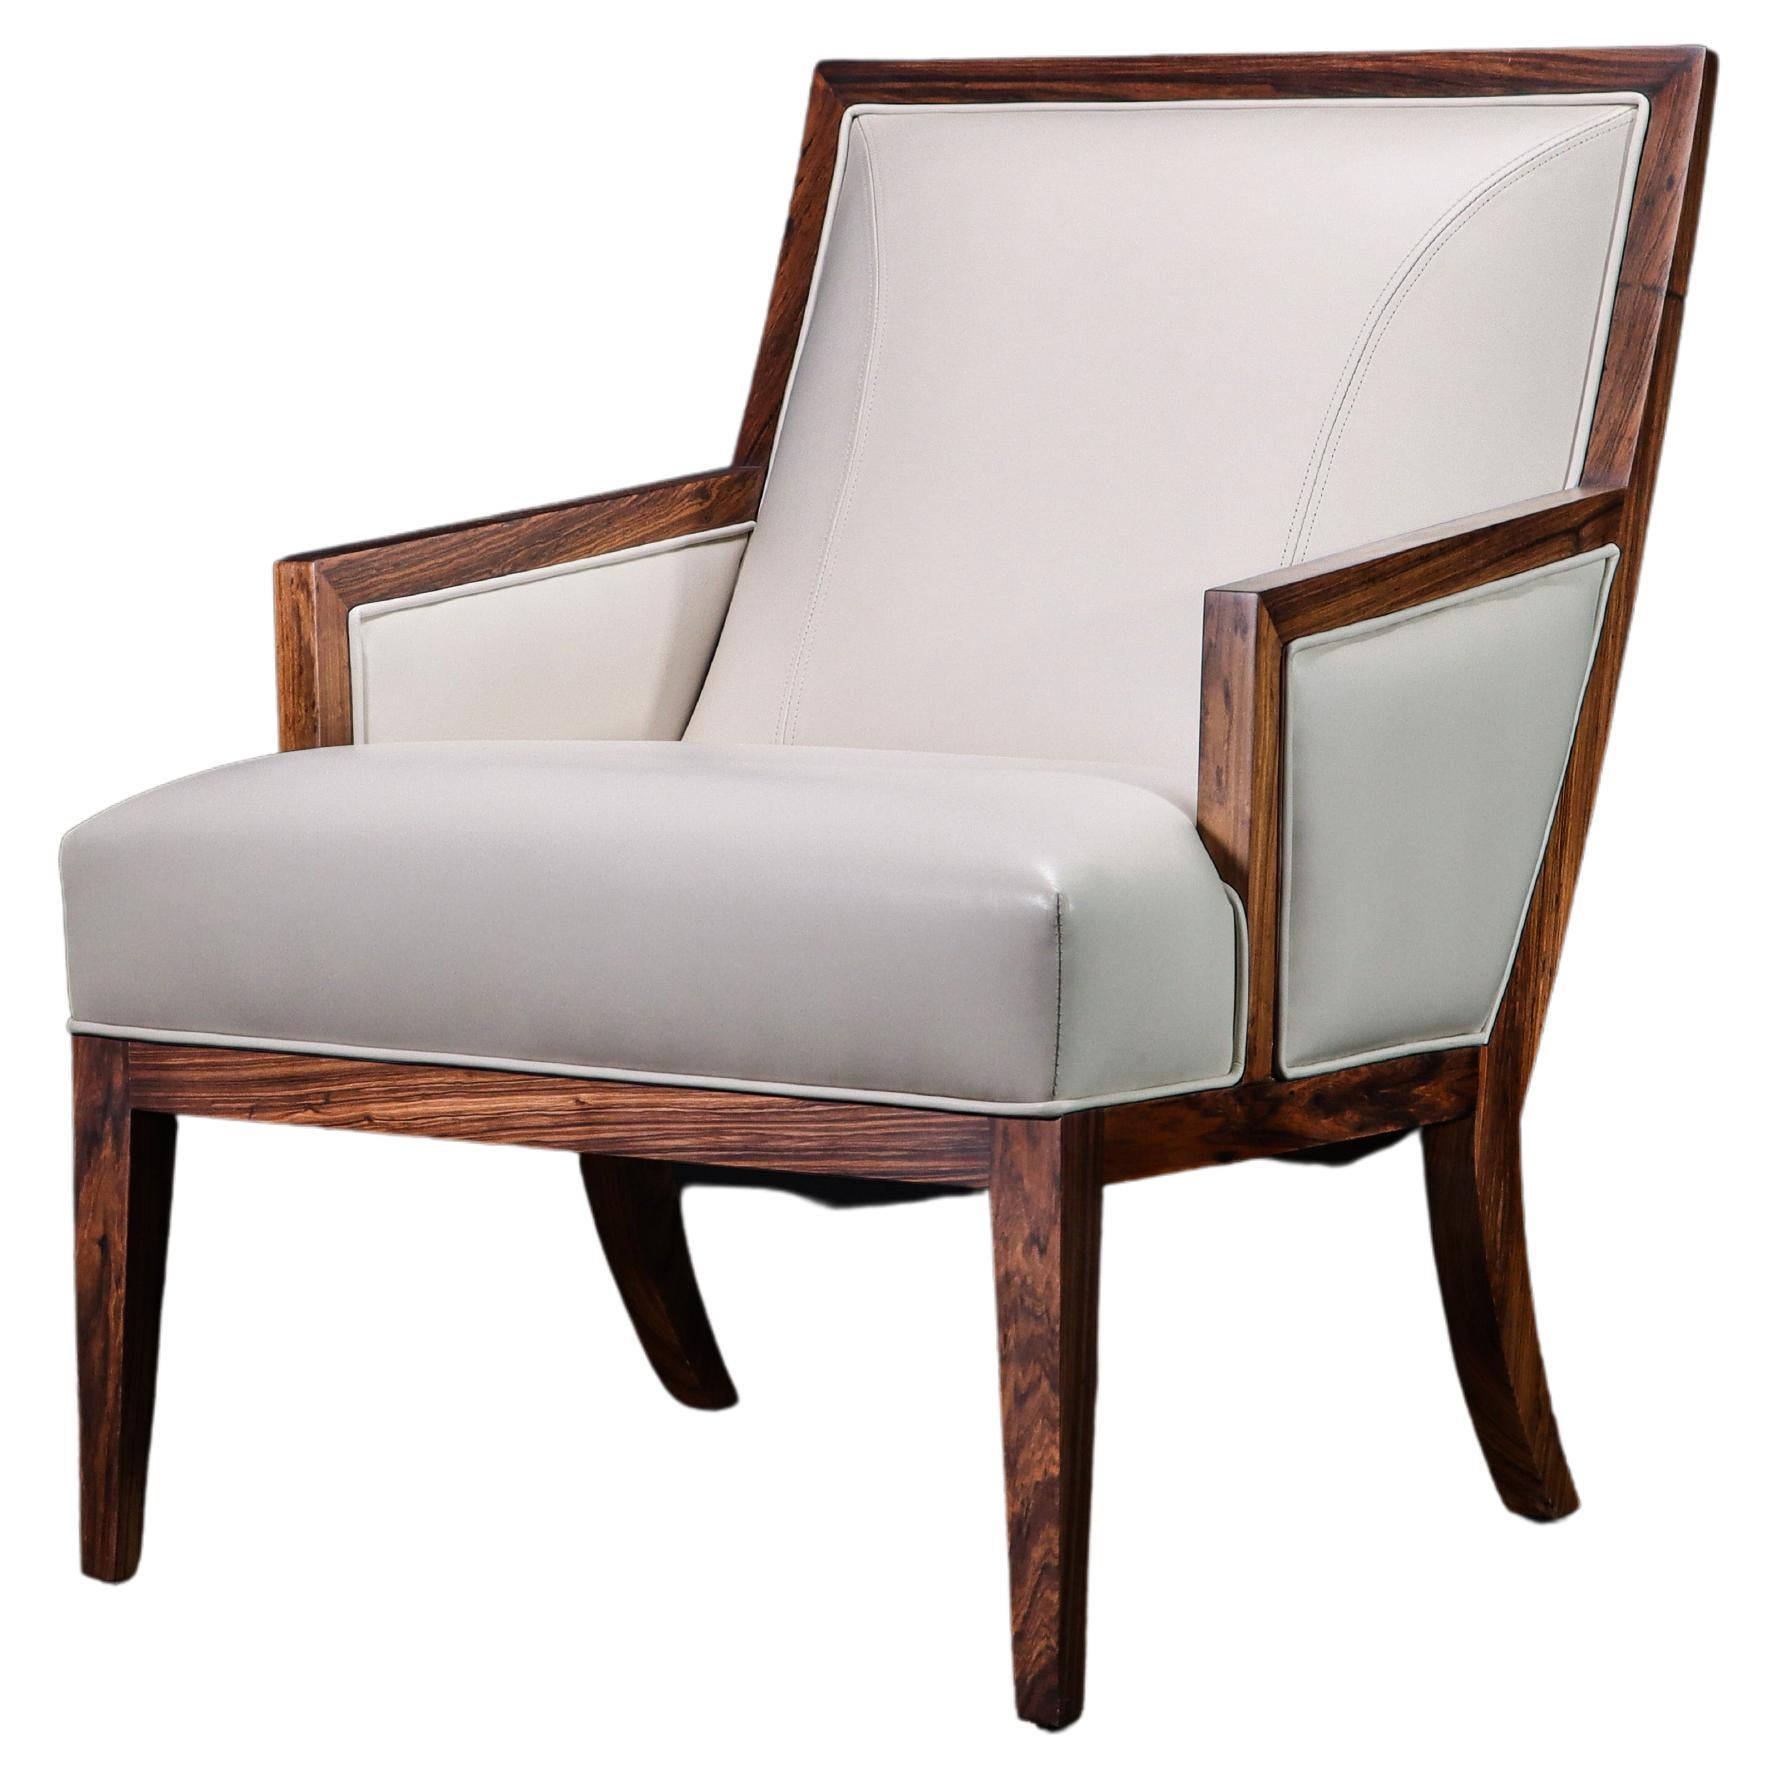 Contemporary Lounge Chair in Wood and White Leather from Costantini, Belgrano